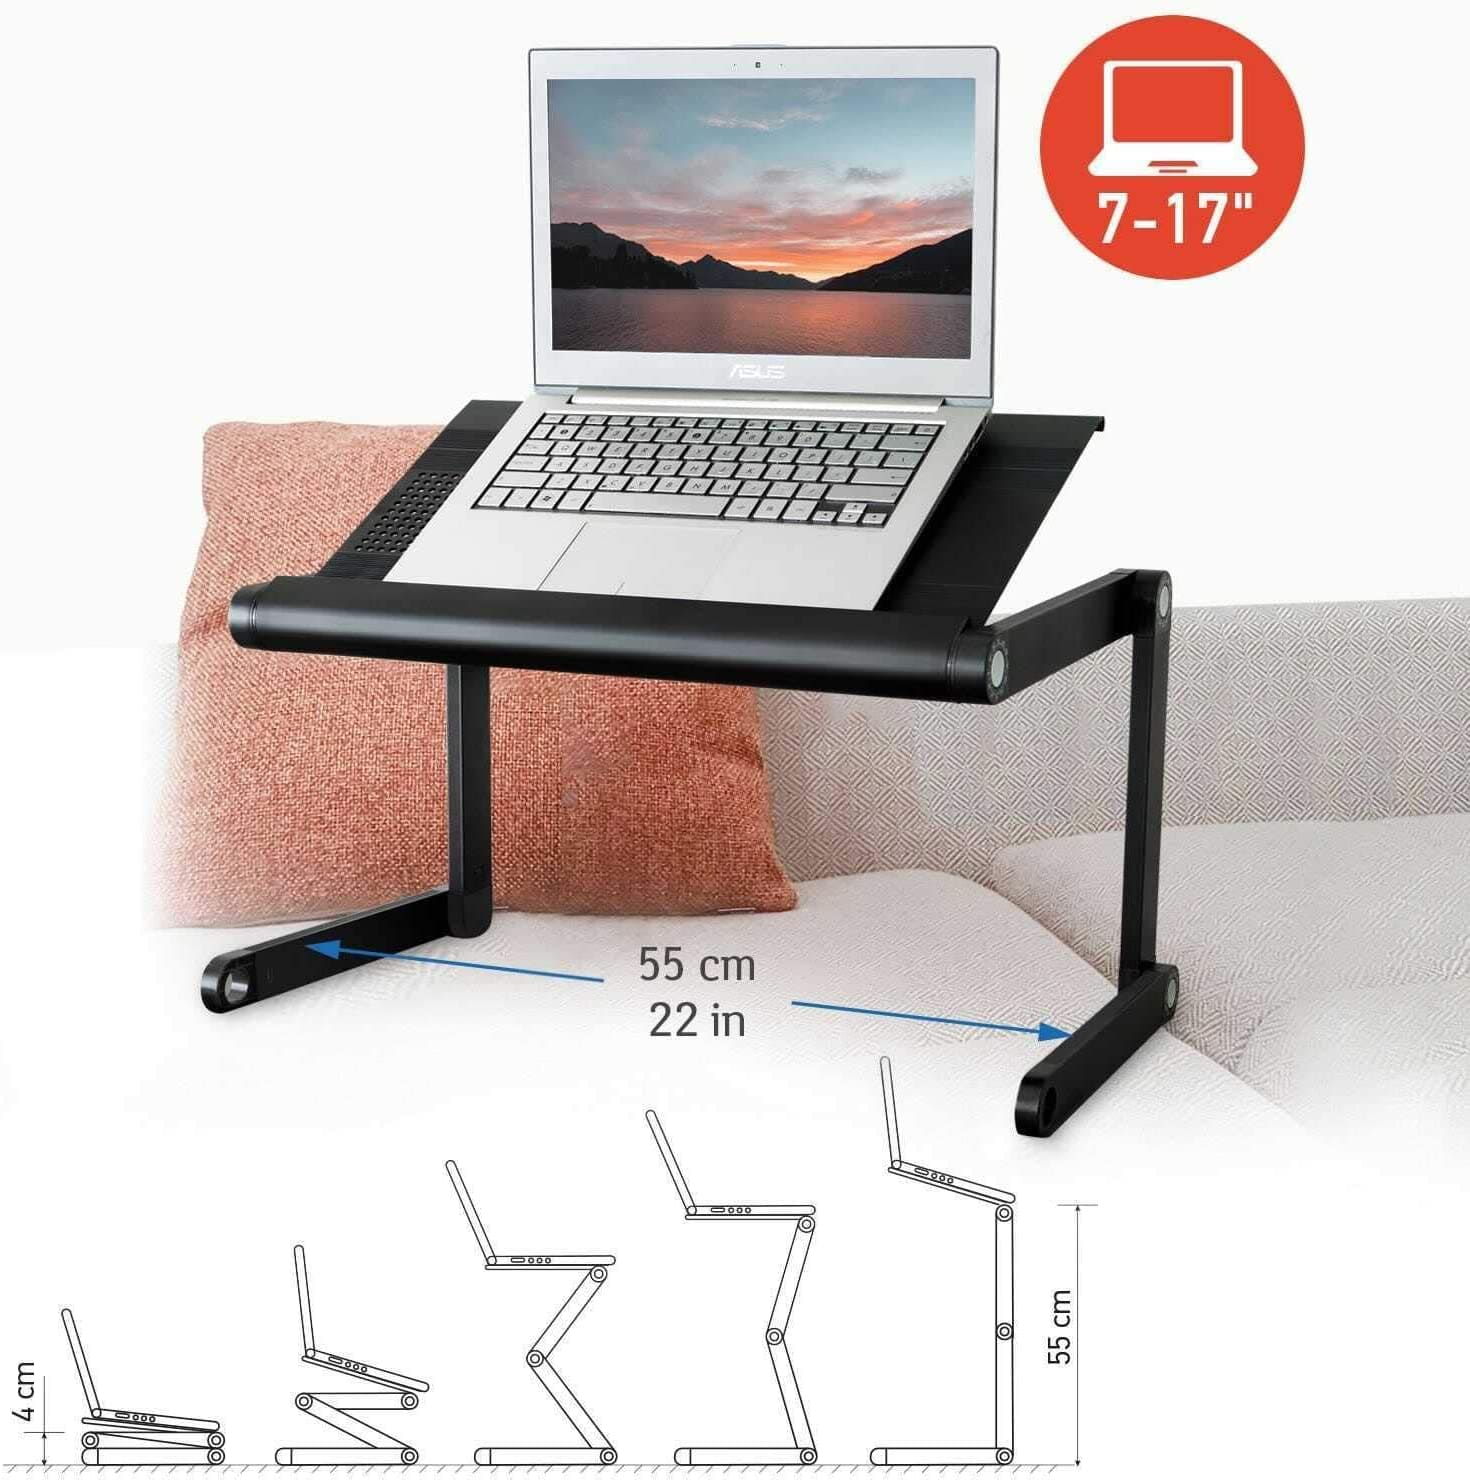 Laptop Stand, Laptop Stand for Bed, Adjustable Laptop Stand, Folding Laptop Stand, Cooling Tray, WonderWorker Nobel, 5